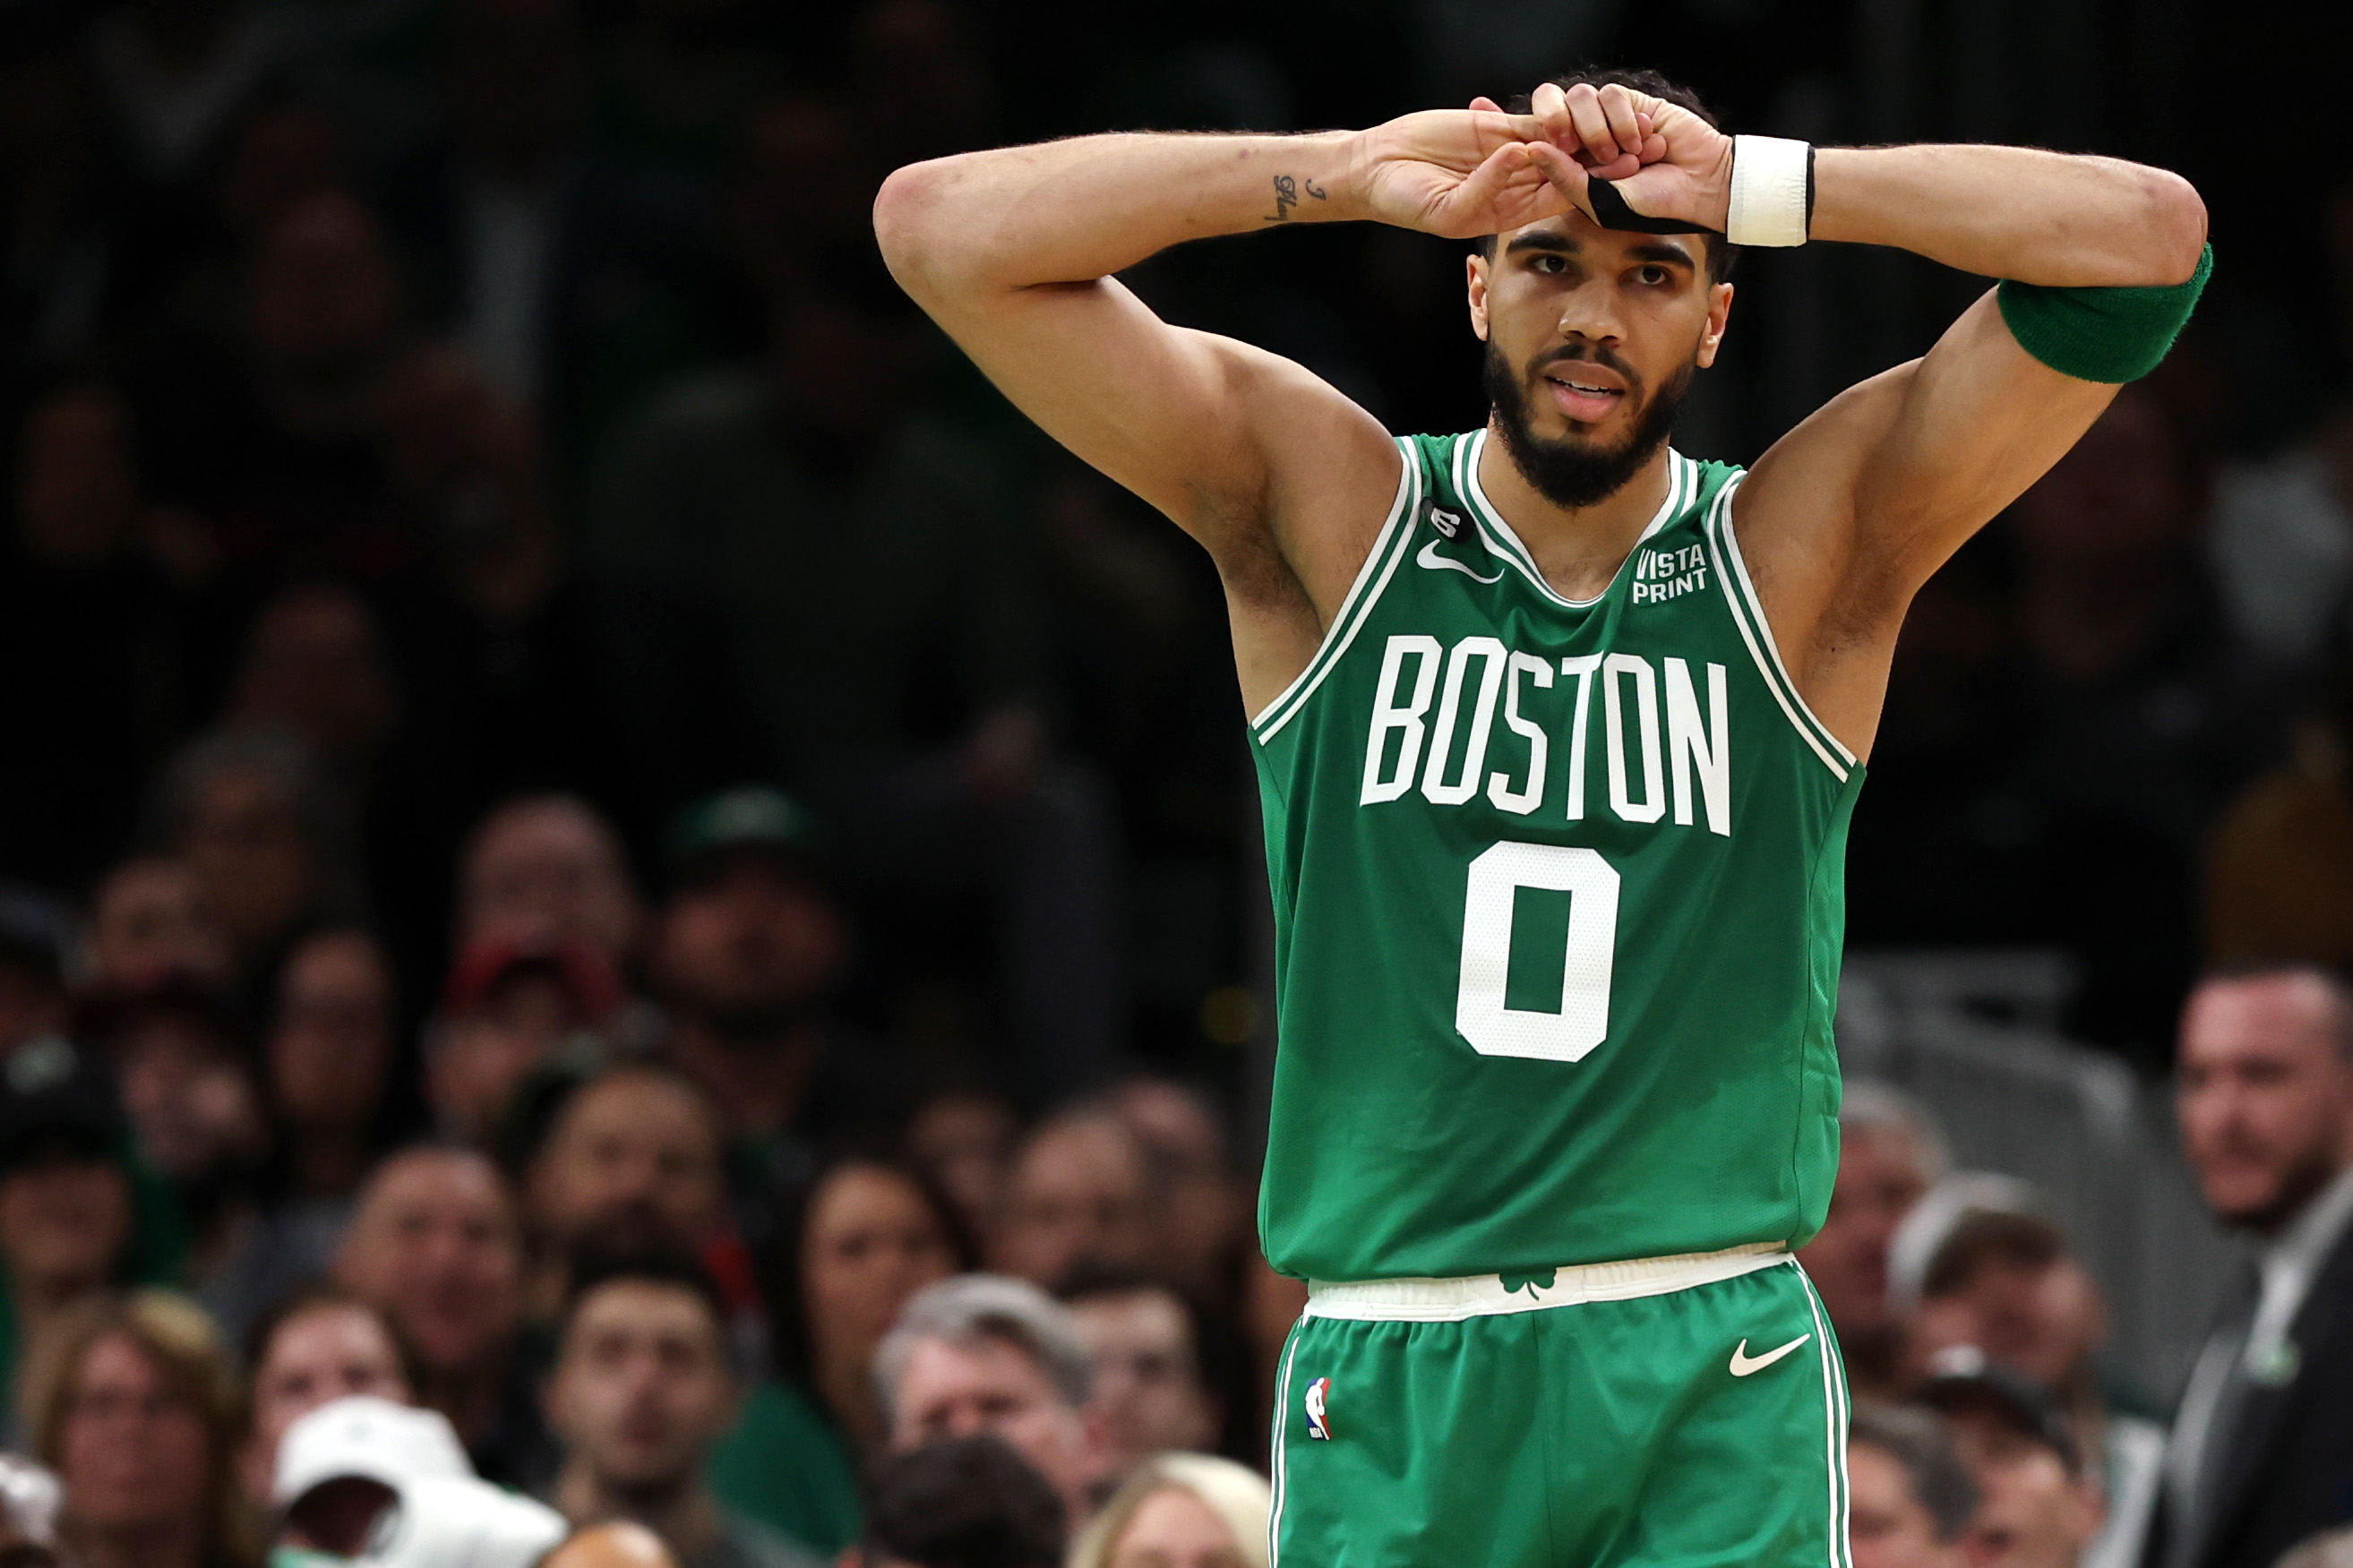 Jayson Tatum of the Boston Celtics looks on during the first quarter of Game 2 of the Eastern Conference Semifinals.